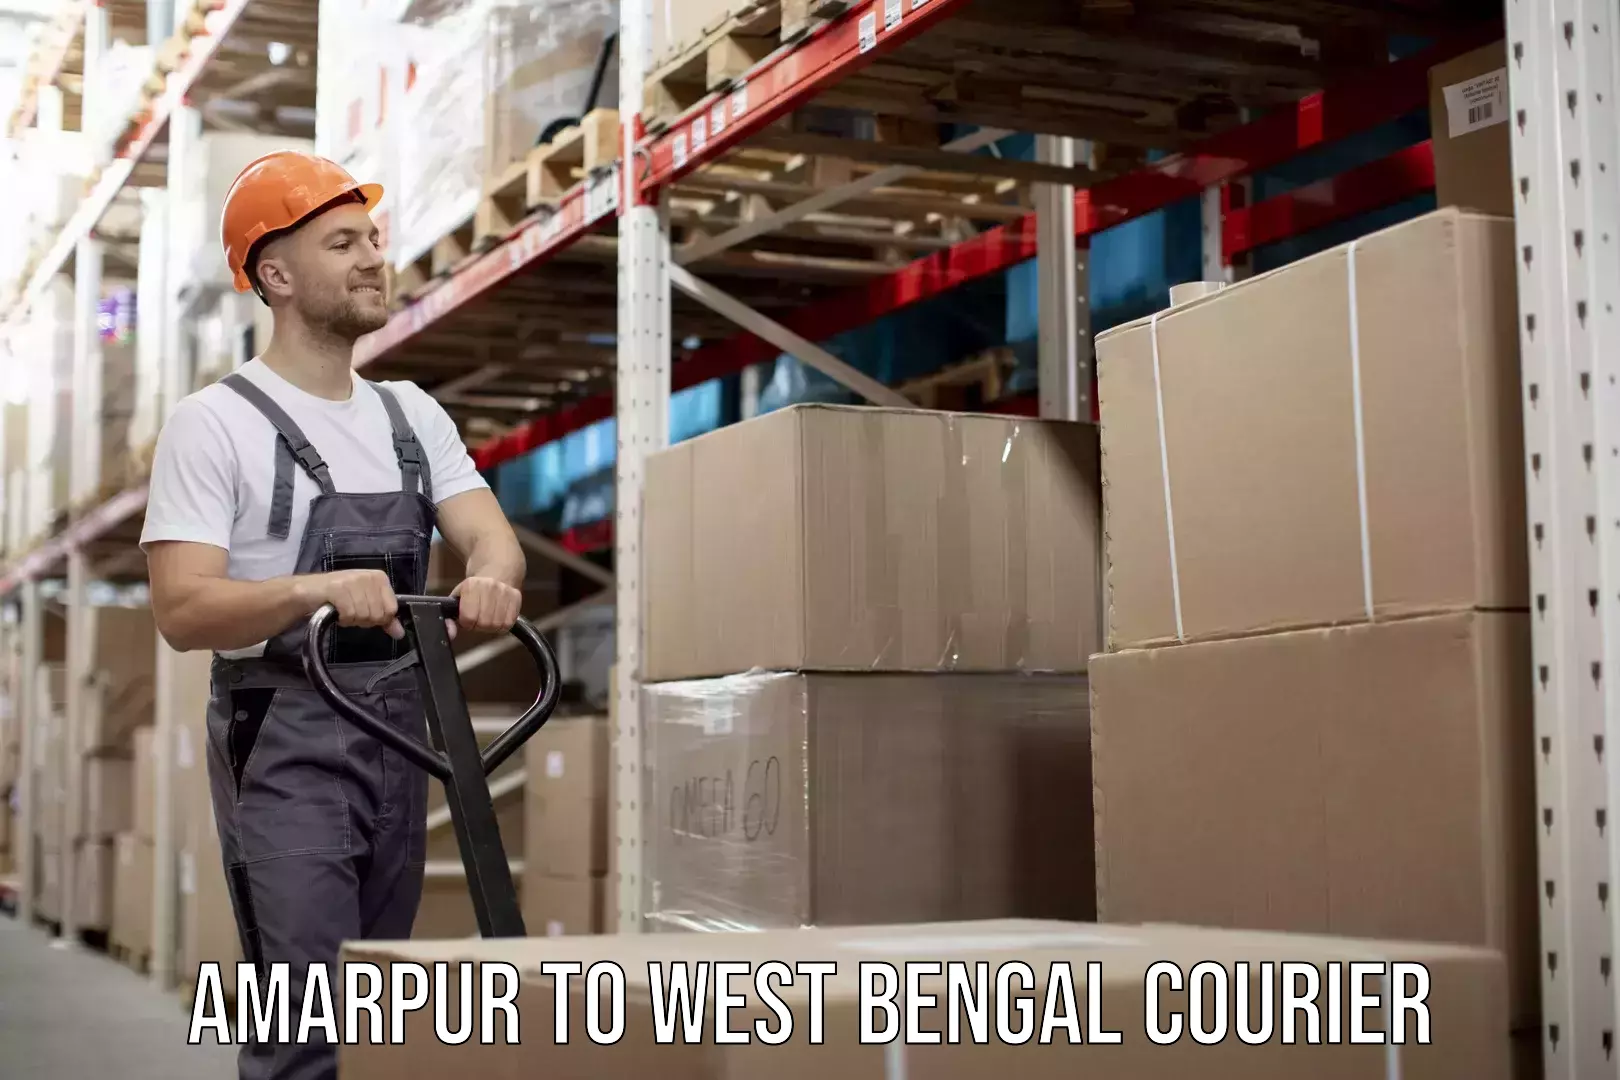 International courier networks Amarpur to West Bengal